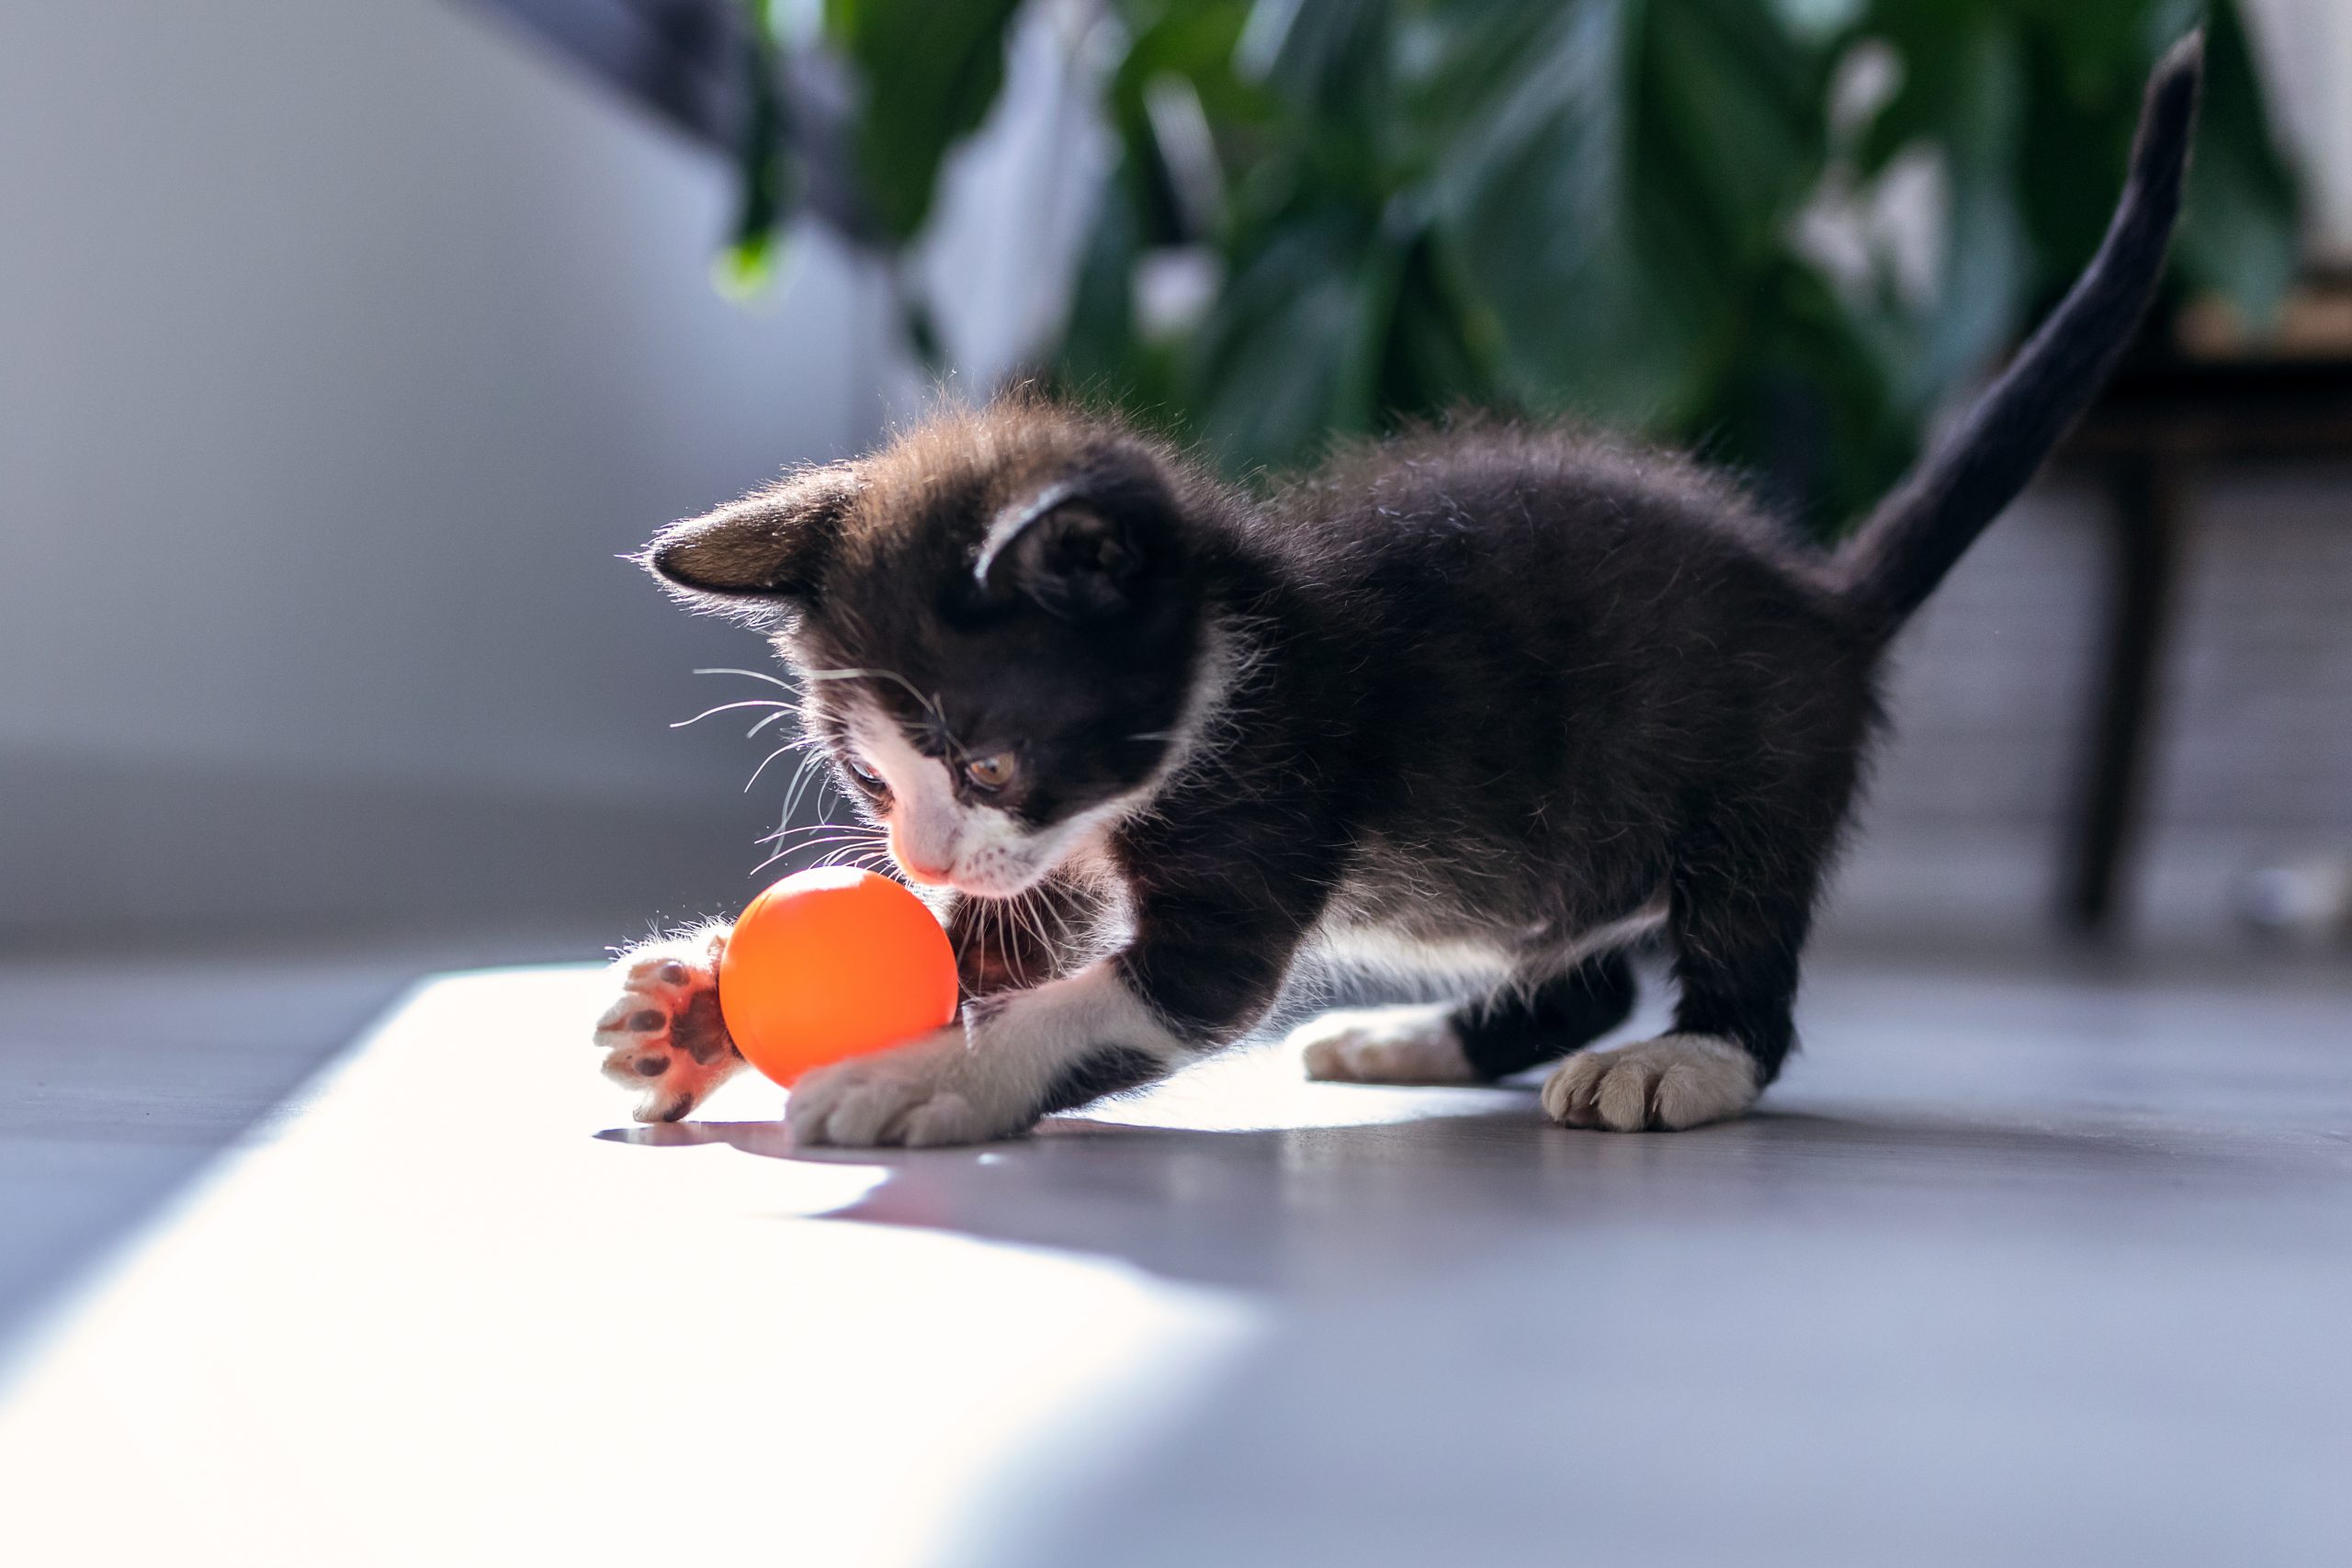 black and white kitten playing with an orange ball